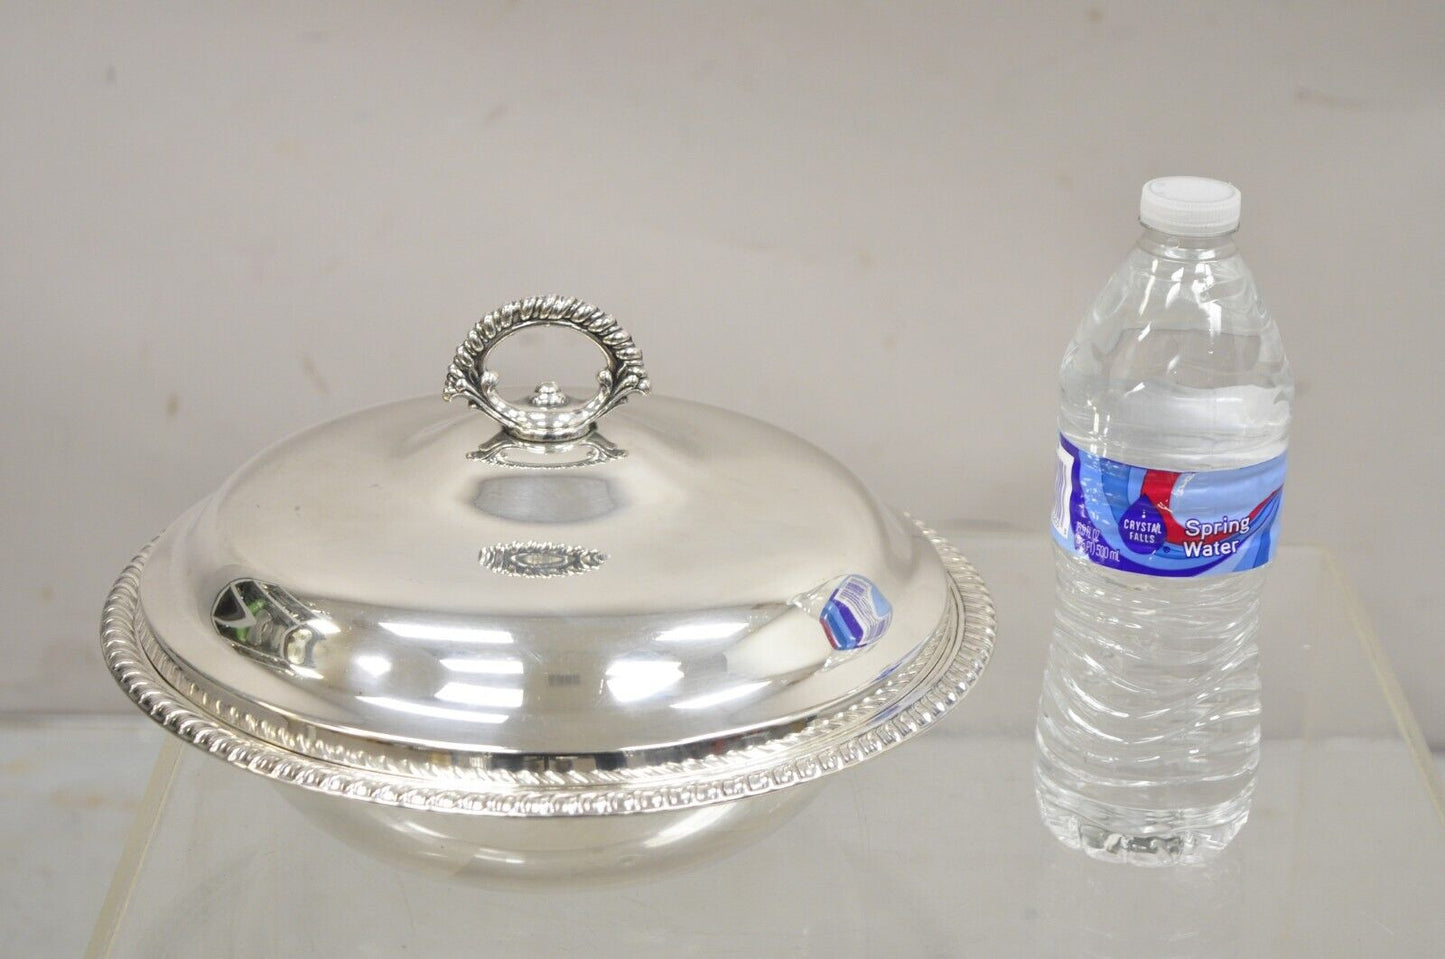 Vintage WMA Rogers Victorian Style Round Silver Plated Covered Casserole Dish